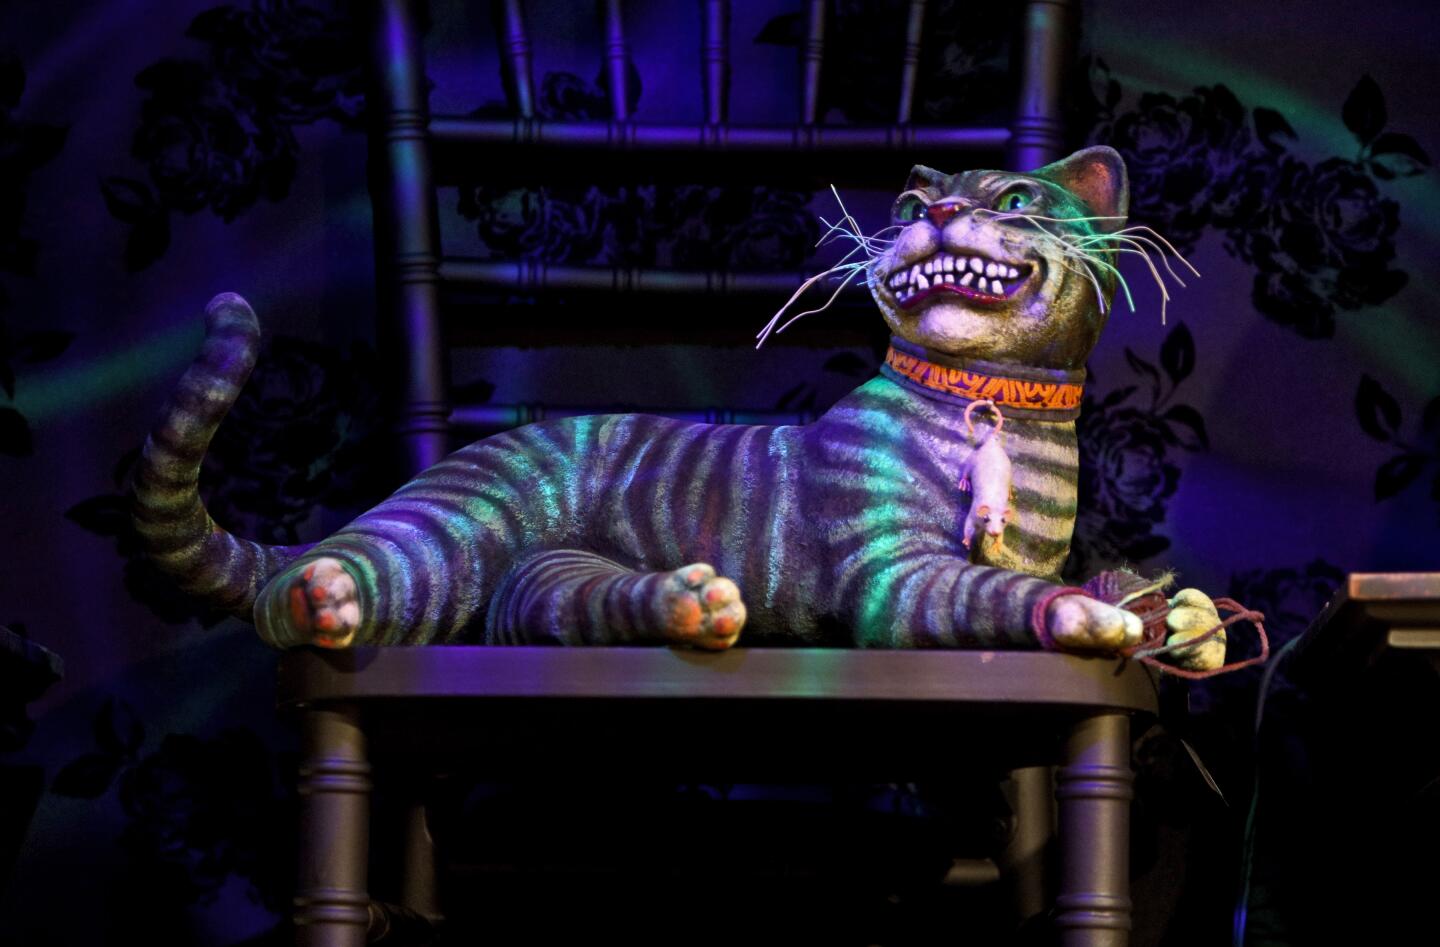 The Cheshire Cat greets visitors to "Malice in Wonderland," the Halloween boutique at Roger's Gardens in Corona del Mar.